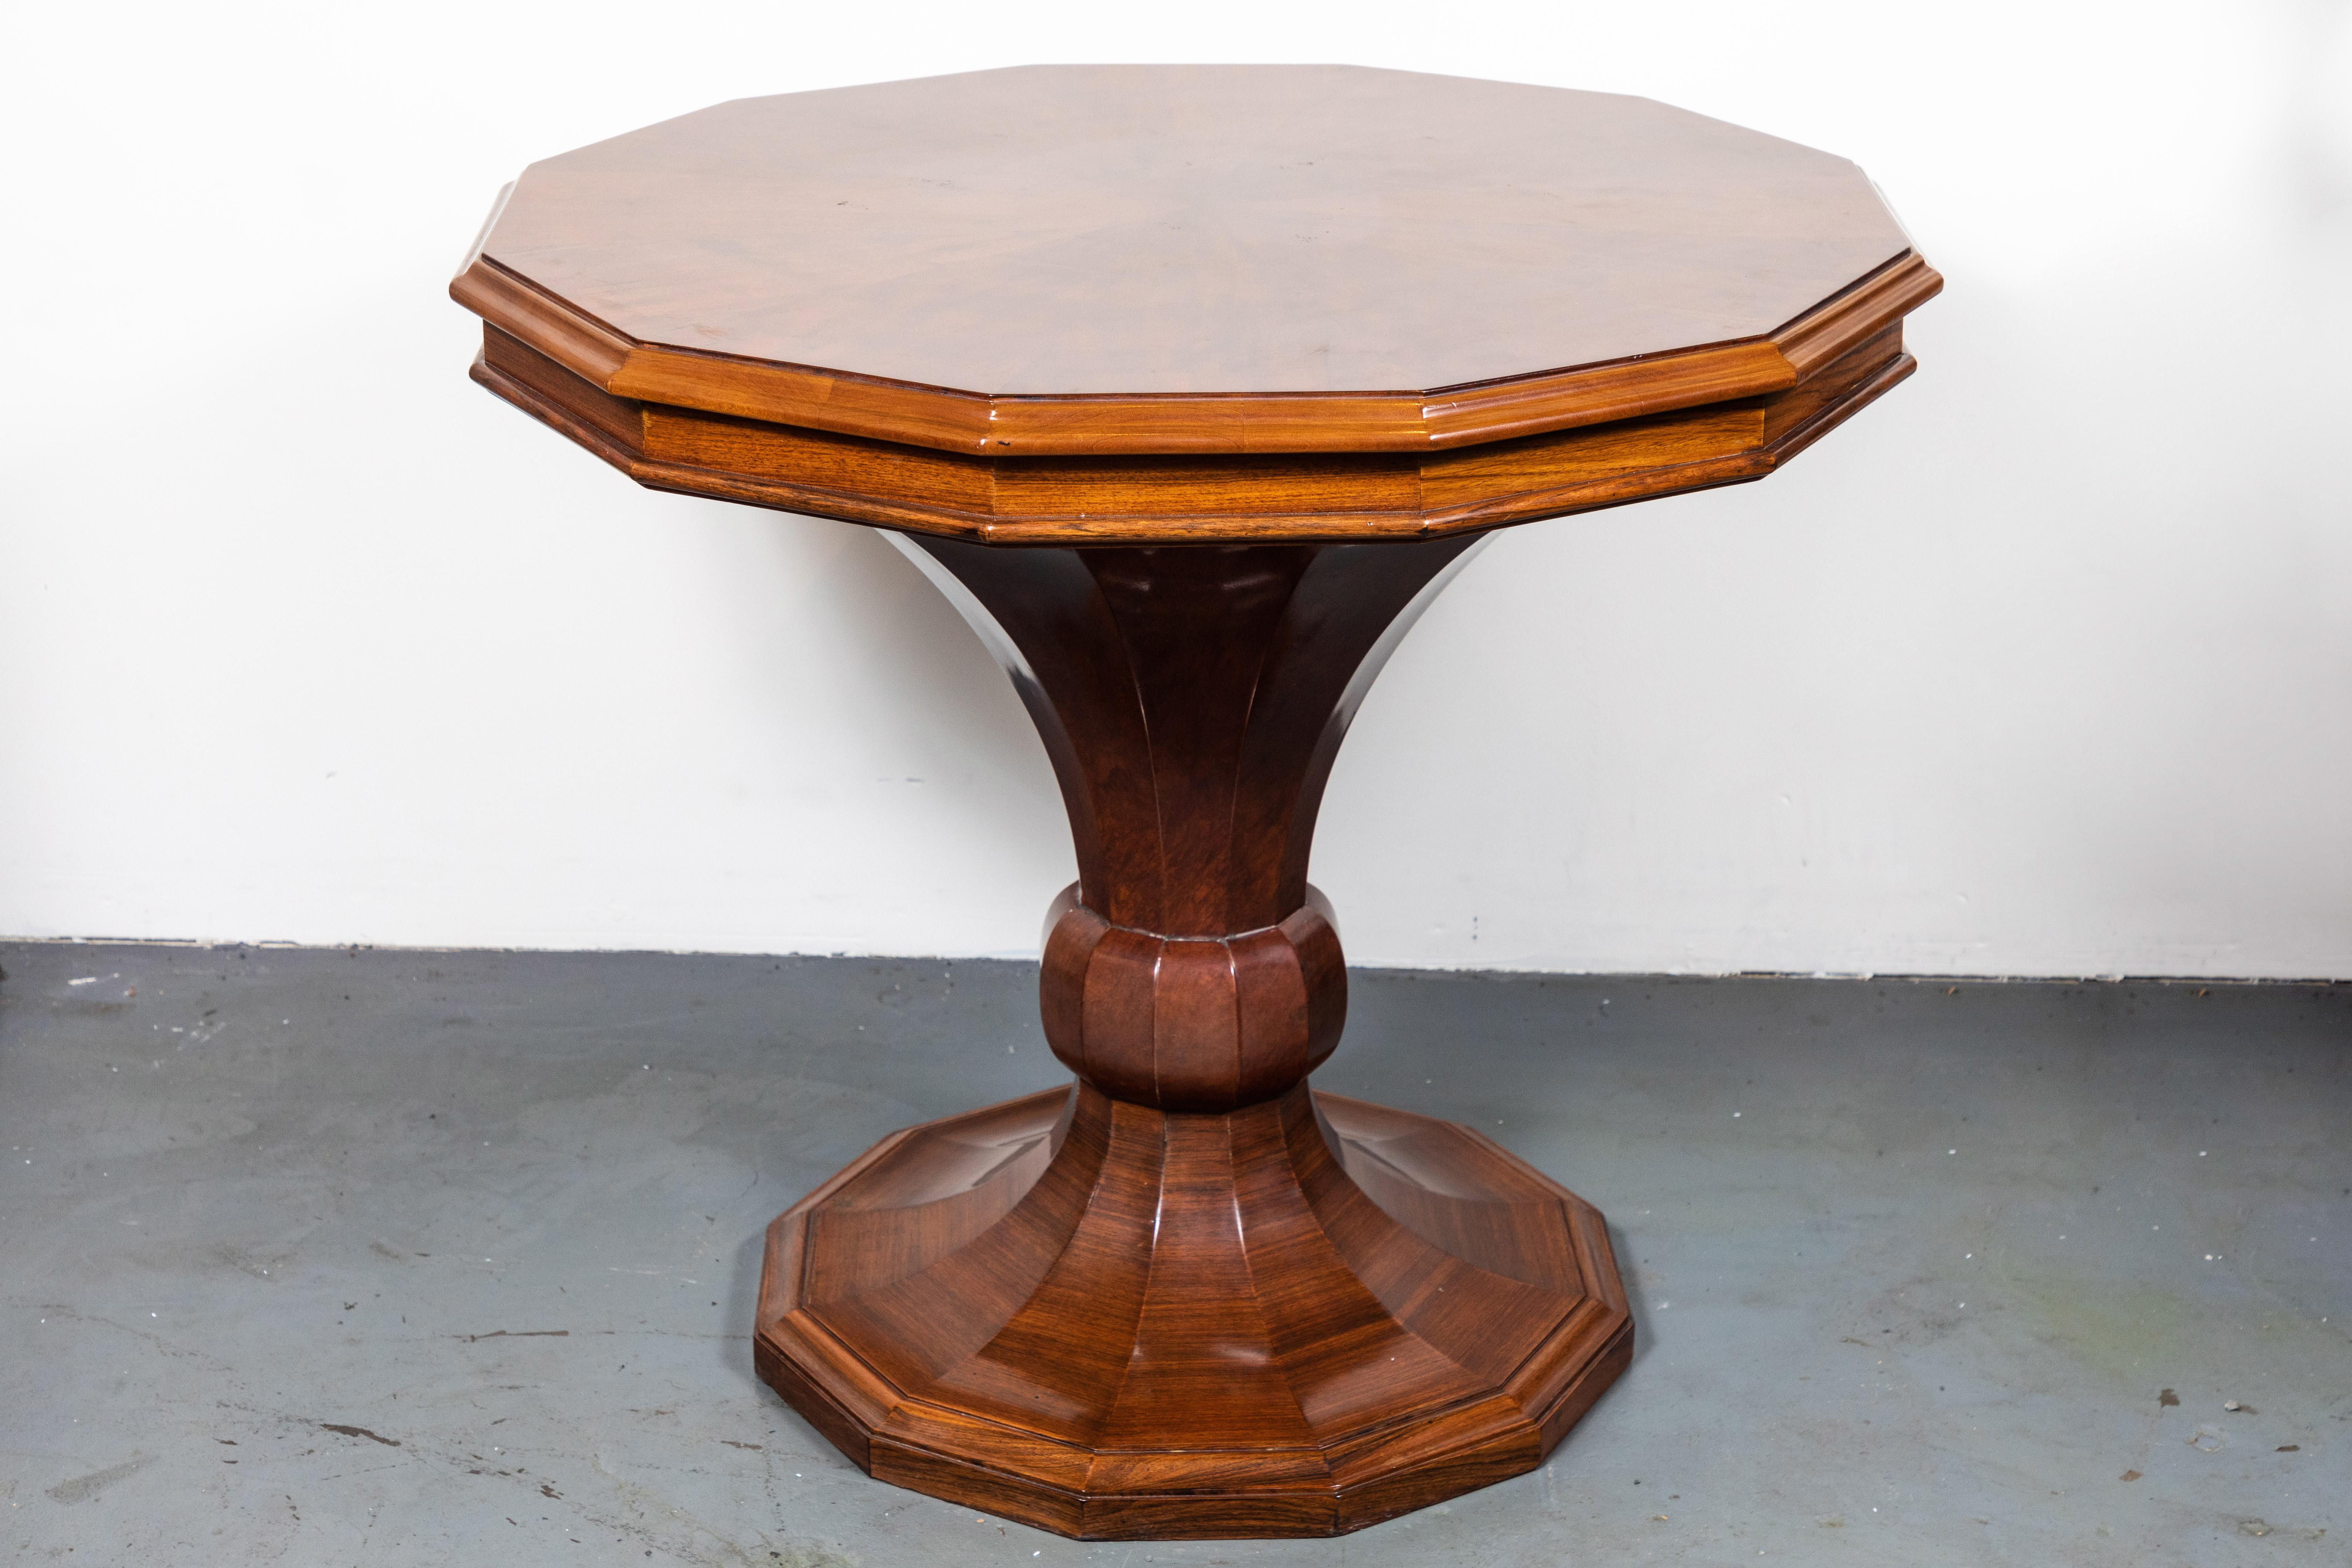 Chic, tapered, Sicilian pedestal side table beautifully veneered in walnut from top to base.